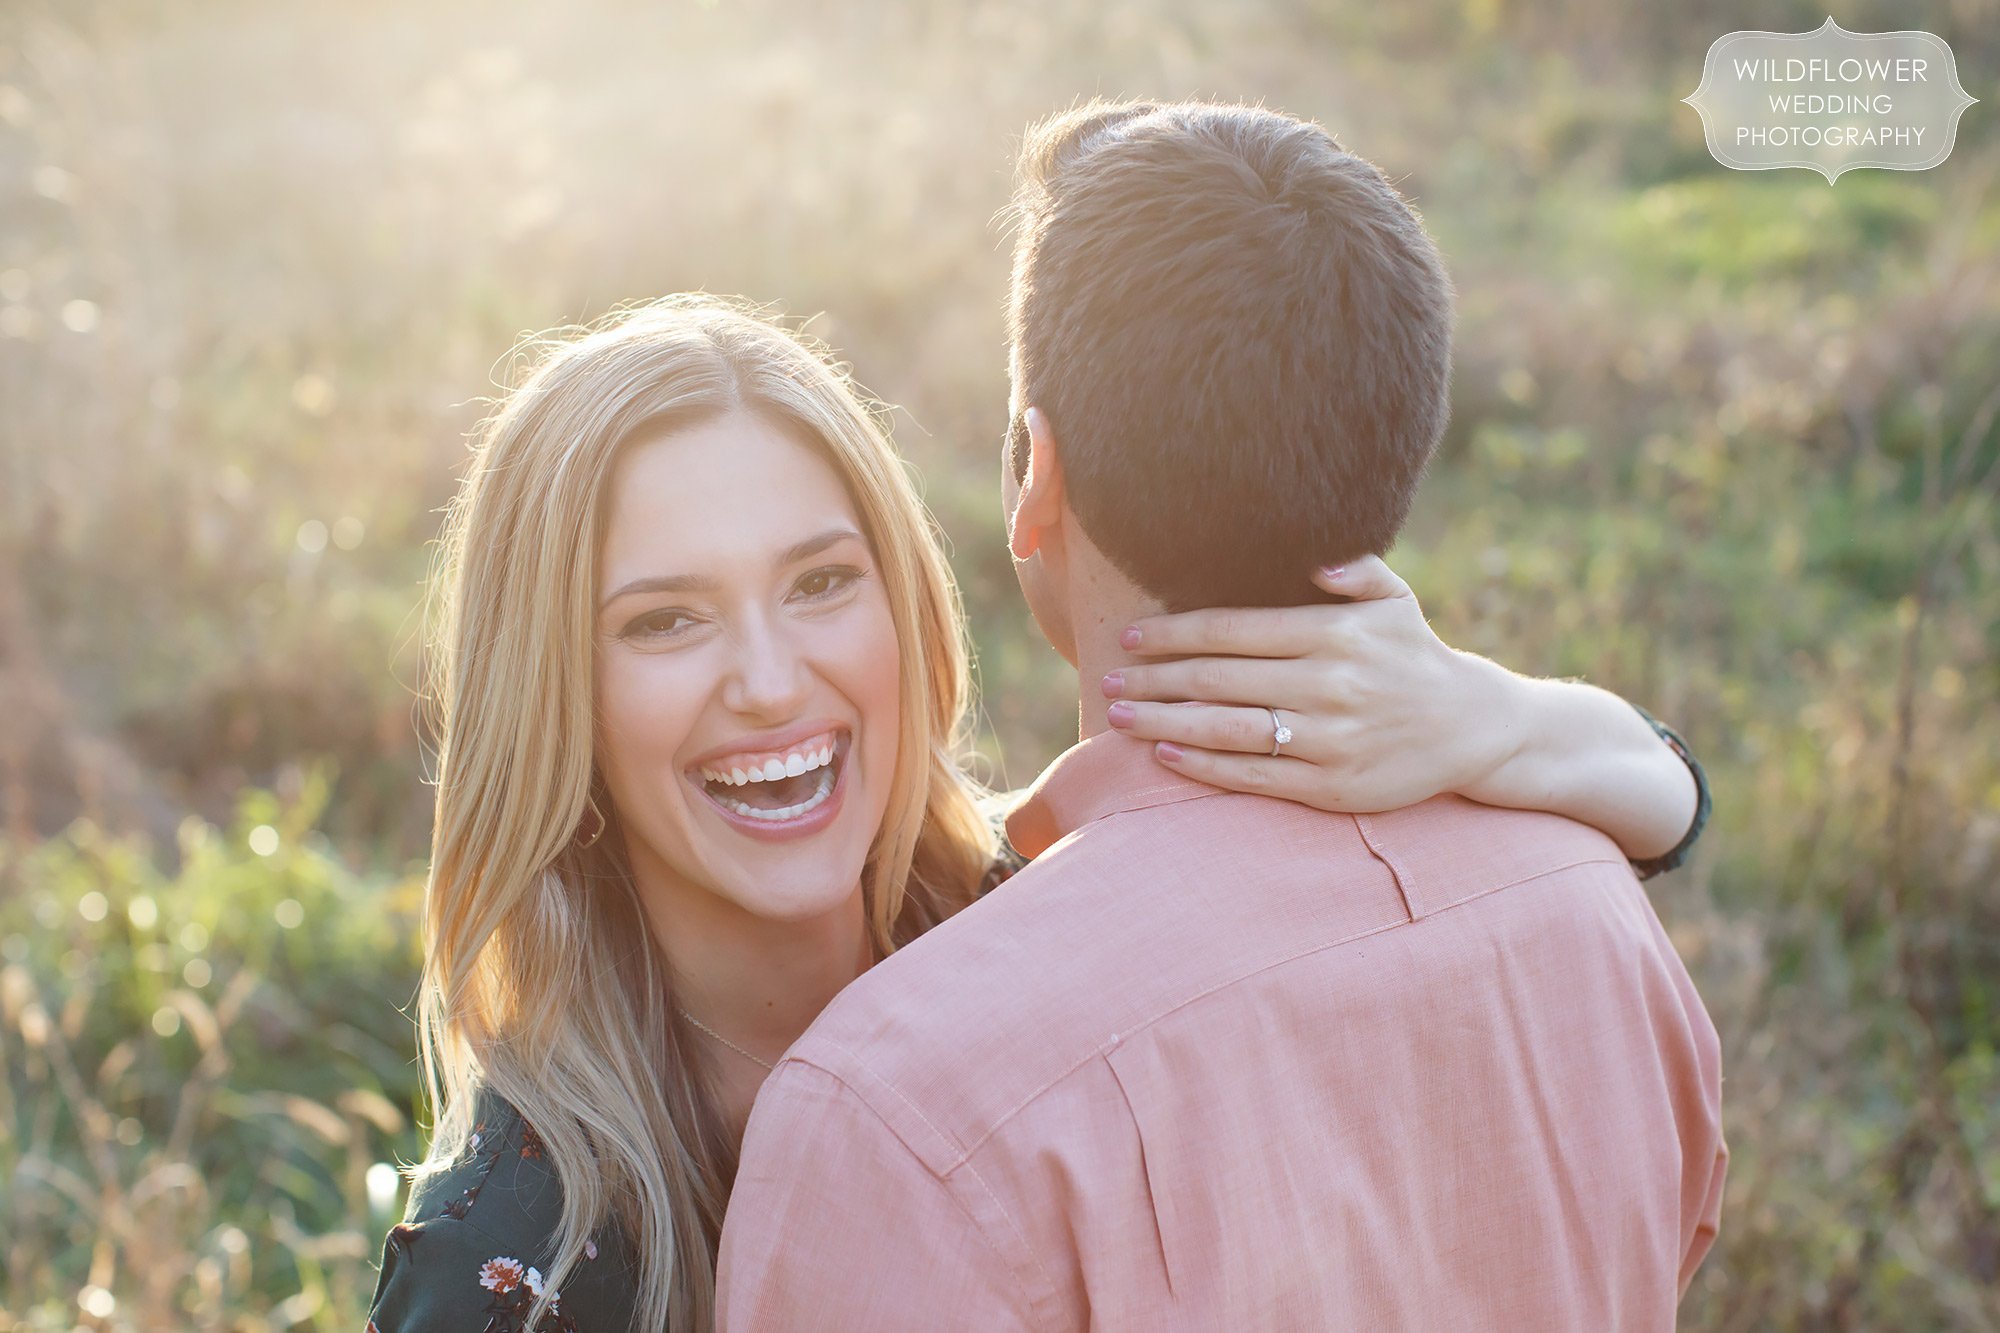 Gorgeous natural engagement photo of the girl laughing during their sunset photo shoot at Grindstone in Columbia, MO.